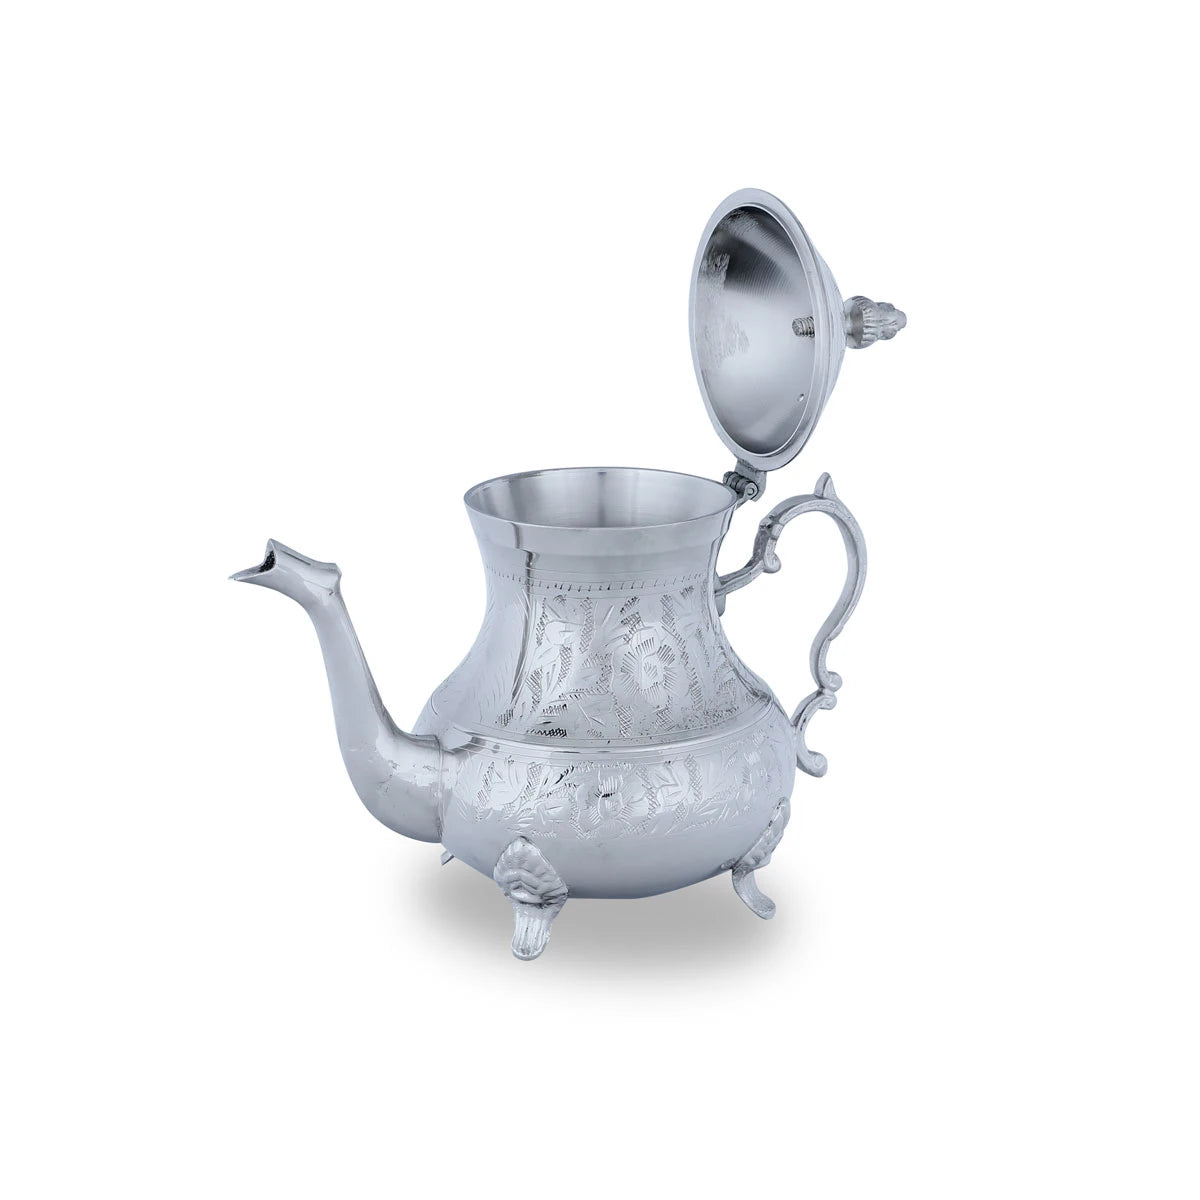 Angled Side View of Glossy Silver Vintage Brass Teapot with Open Top